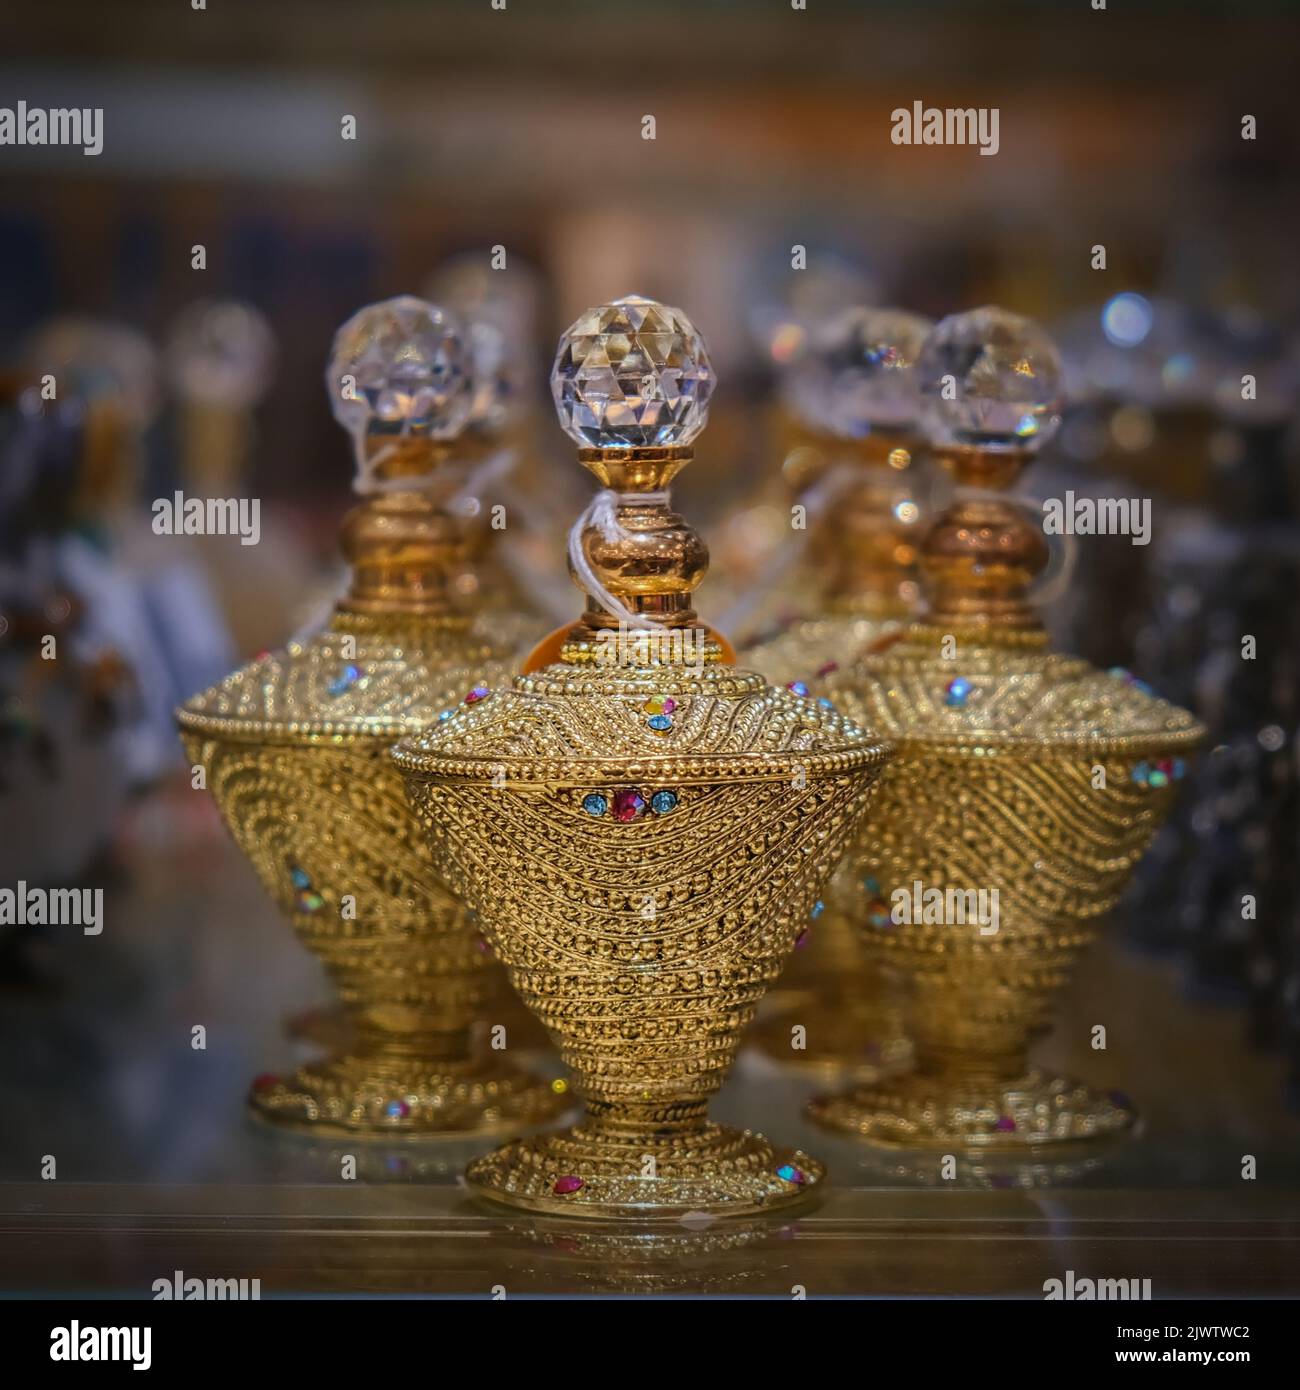 Blurred photo of Perfume Shop Display with three golden-colored ornate oriental perfume bottles for oud or aroma essence oil close up. Stock Photo